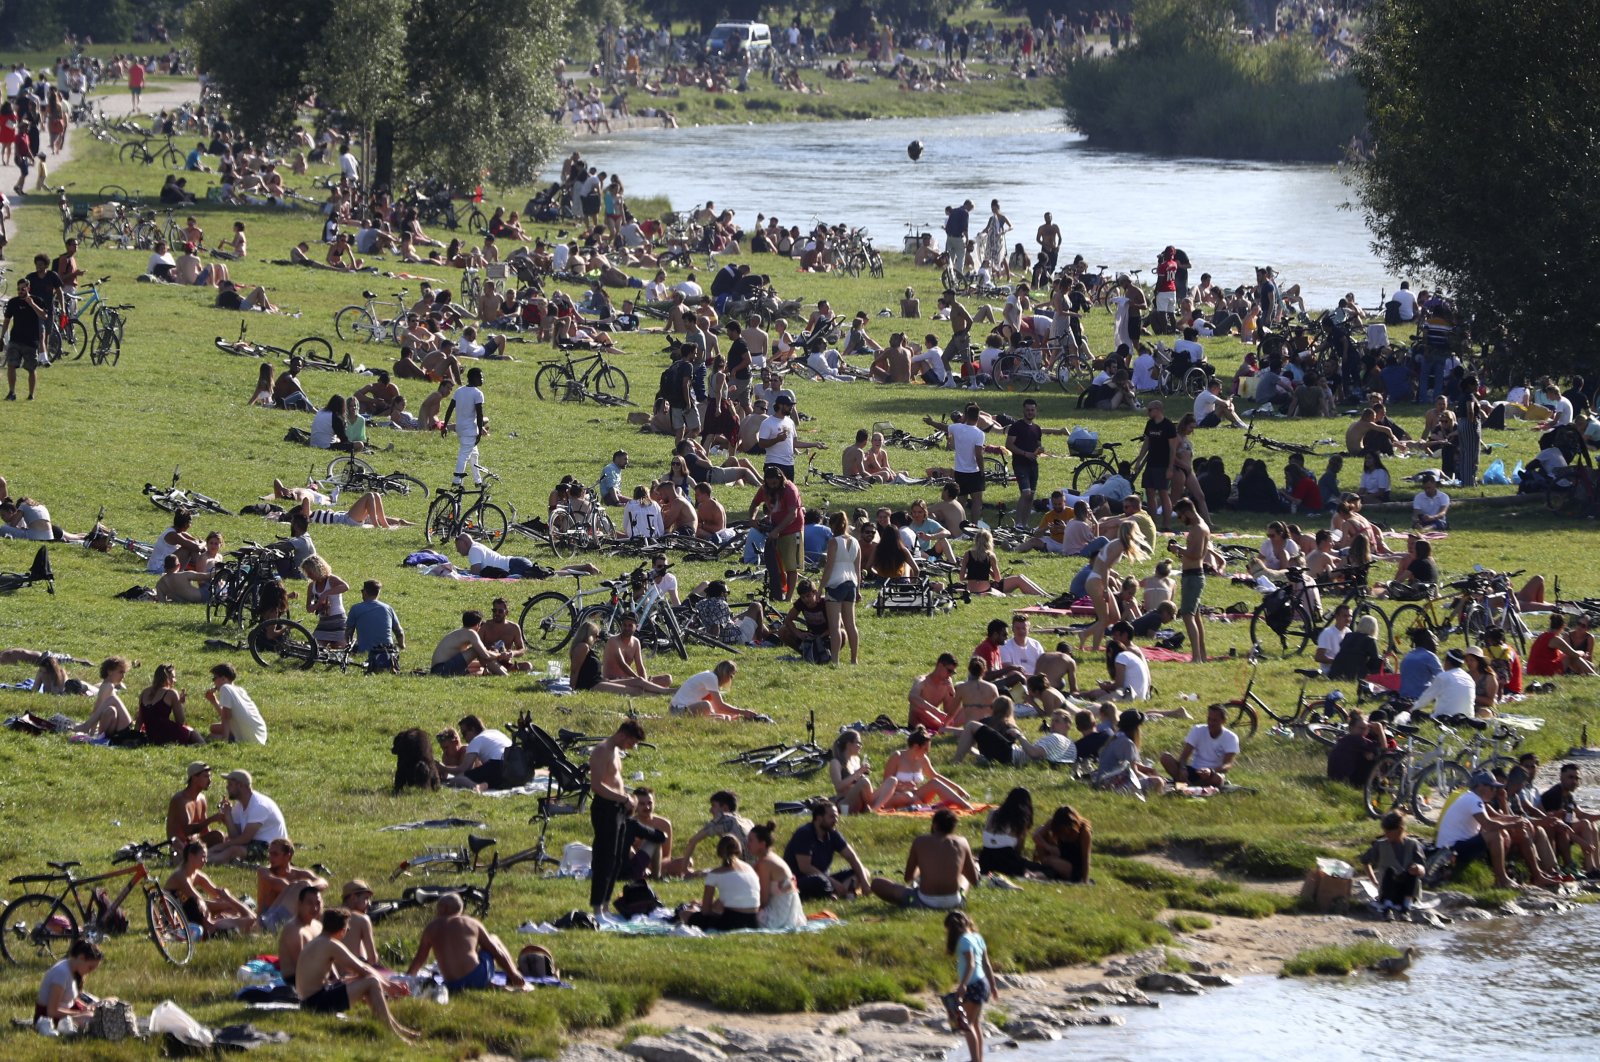 Thousands of people enjoy the summer weather on the banks of the Isar river in Munich, Germany, July 19, 2020. (AP Photo)